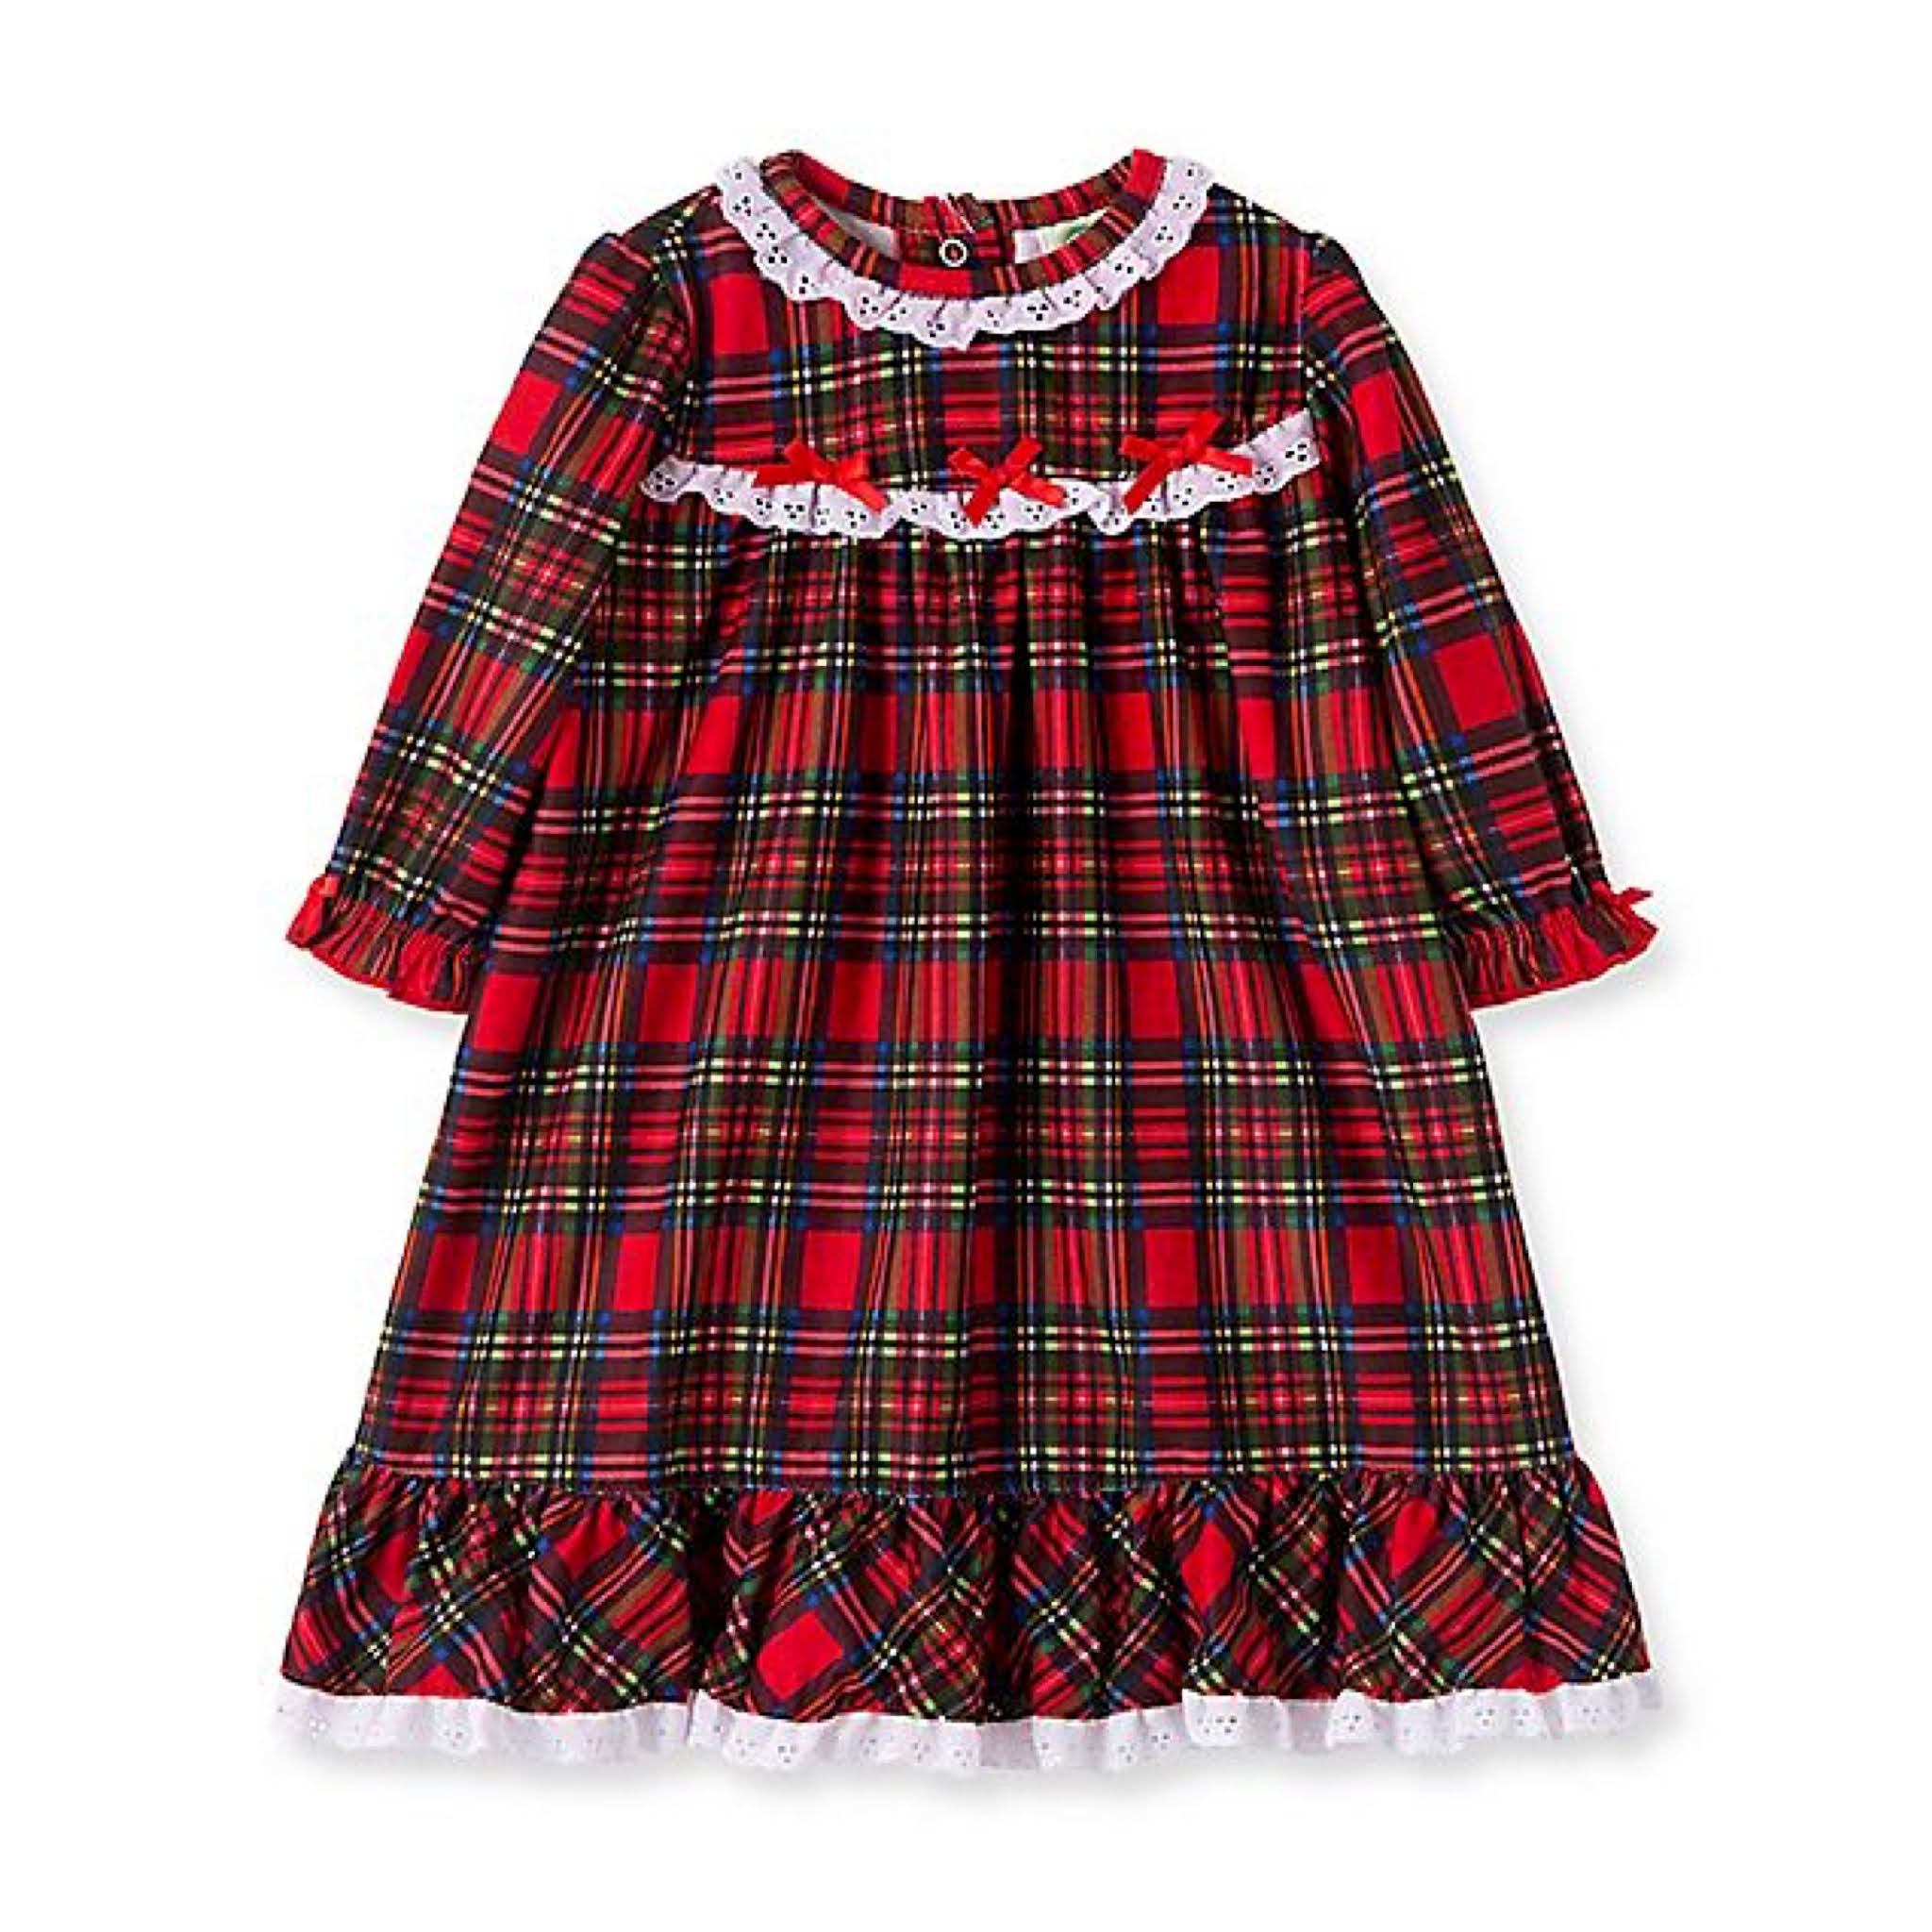 Toddler Girl's Plaid Christmas Nightgown from Little Me